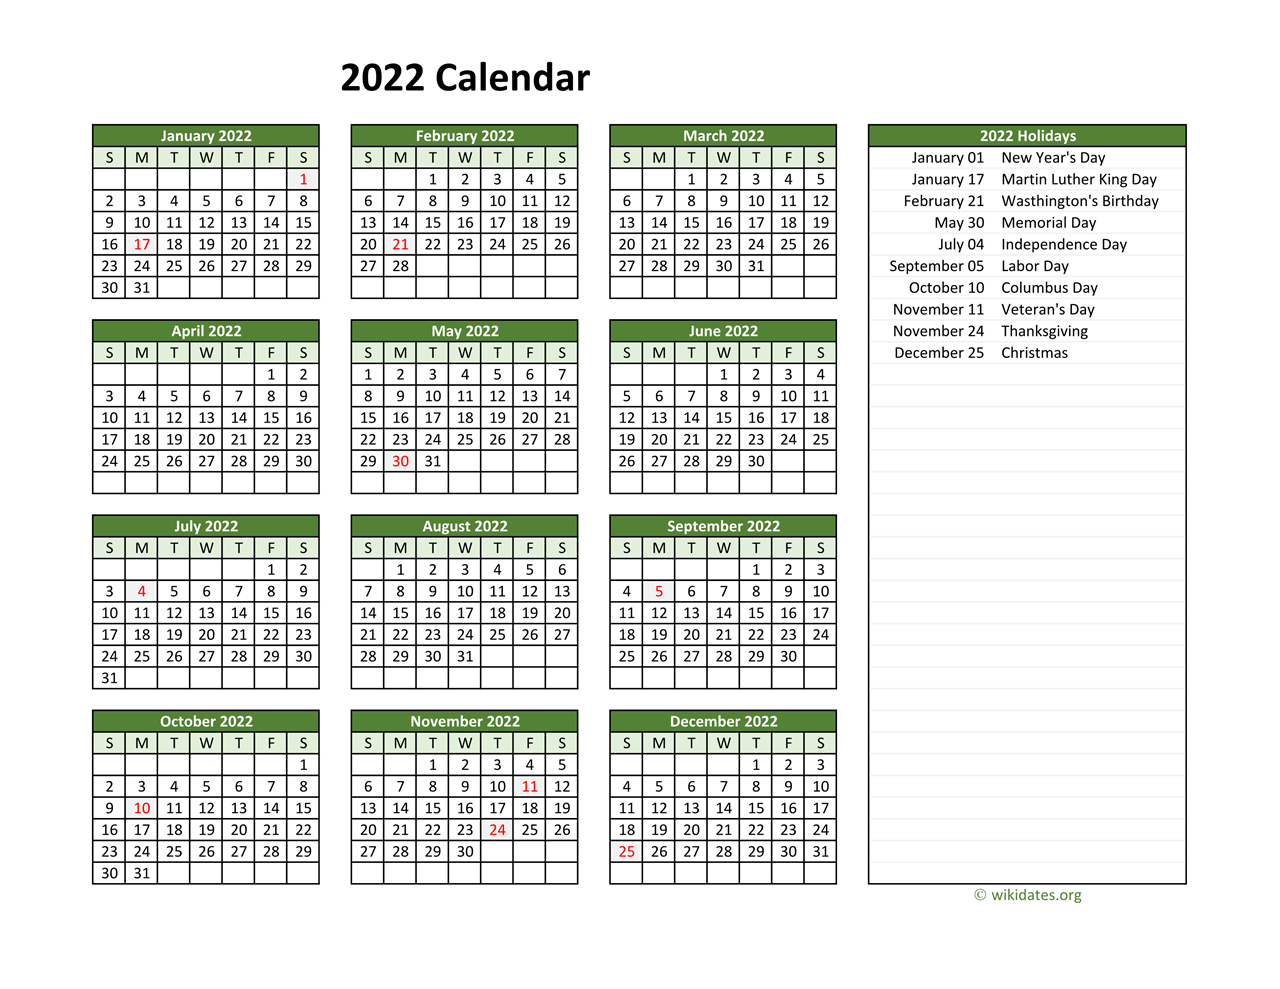 Printable 2022 Calendar With Federal Holidays | Wikidates